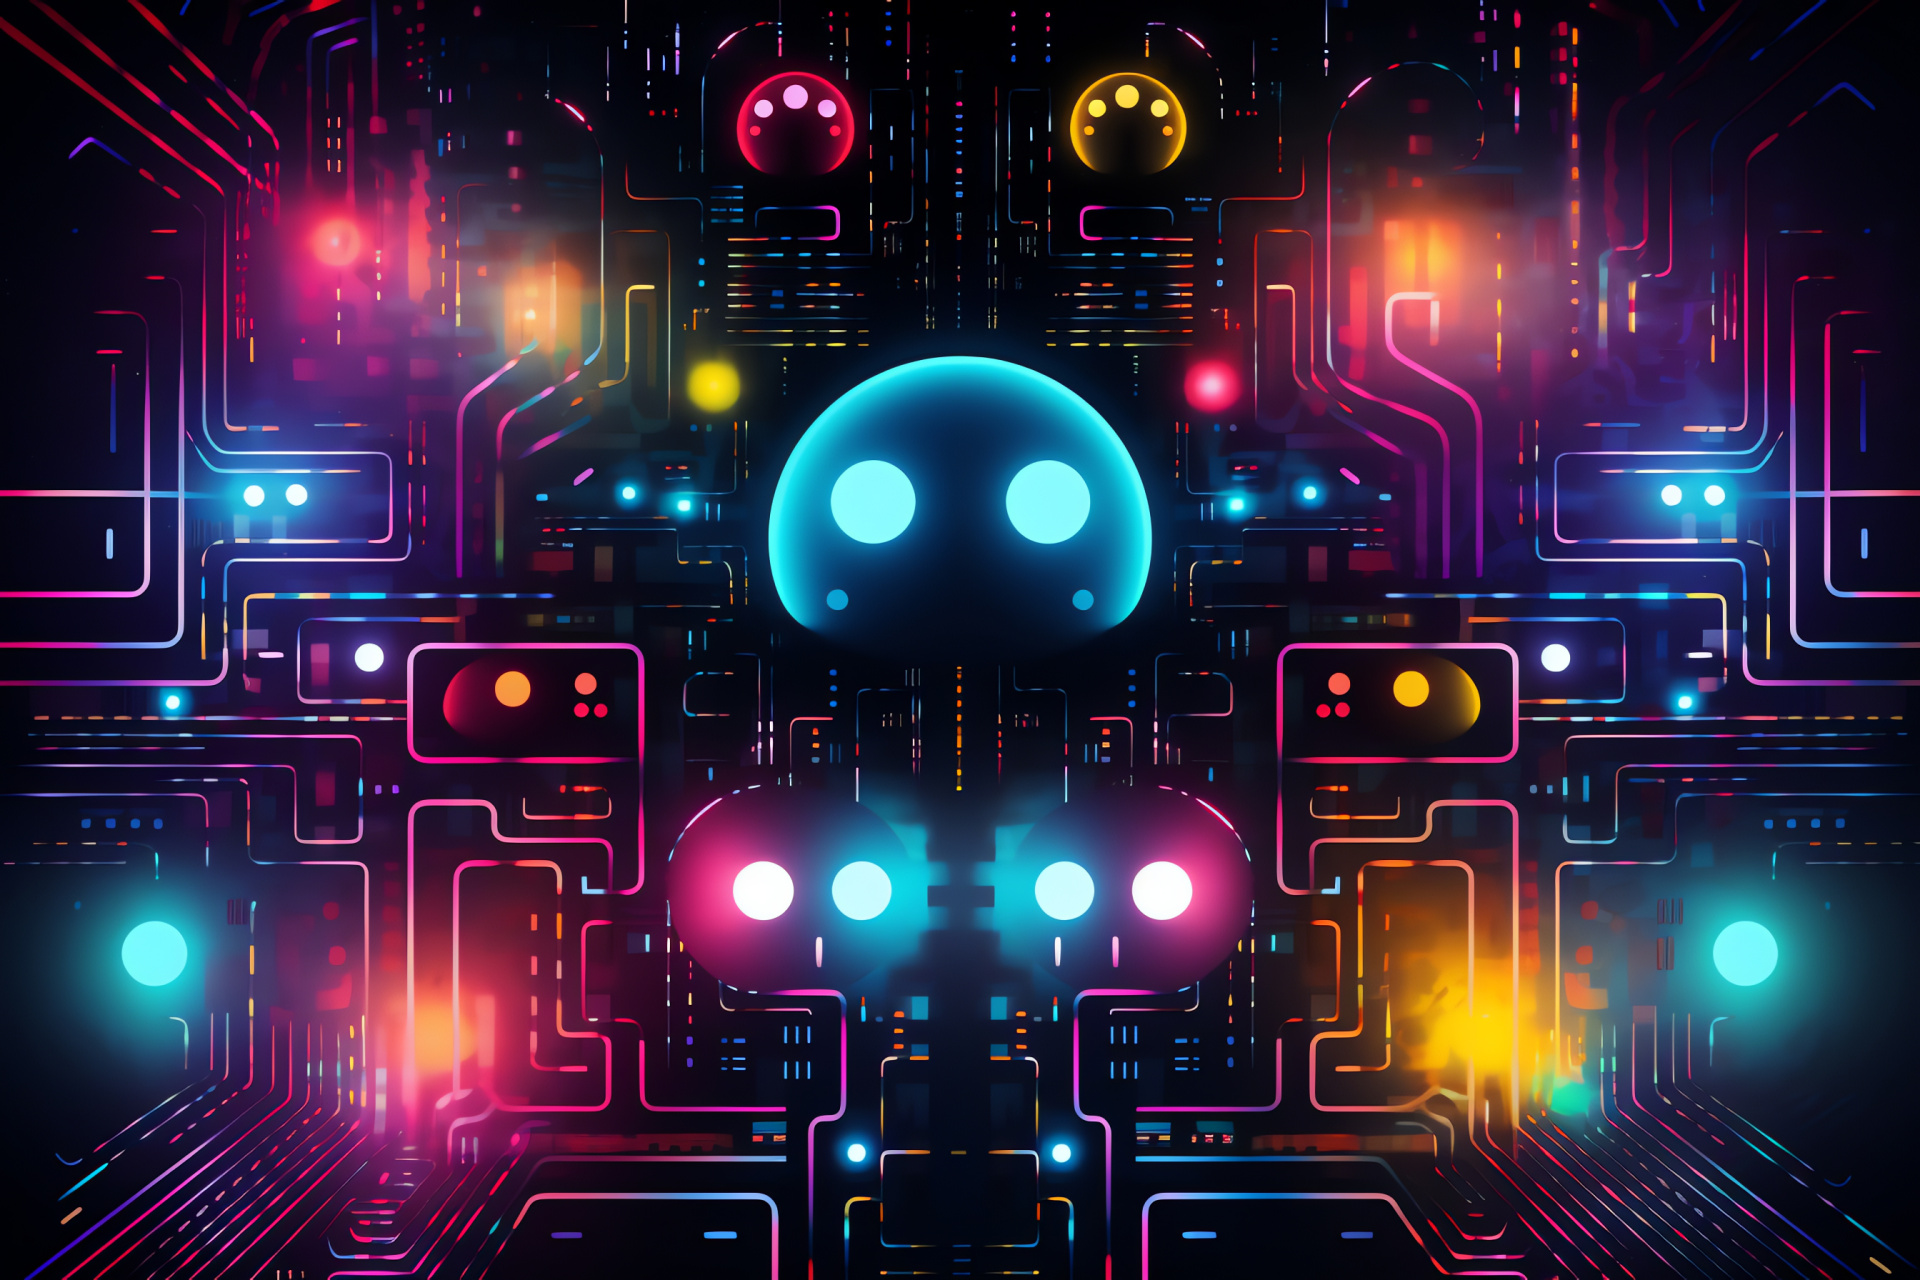 Classic Pacman game character, Arcade gaming mascot, Ghost chaser, Edible dots, Maze runner, HD Desktop Image